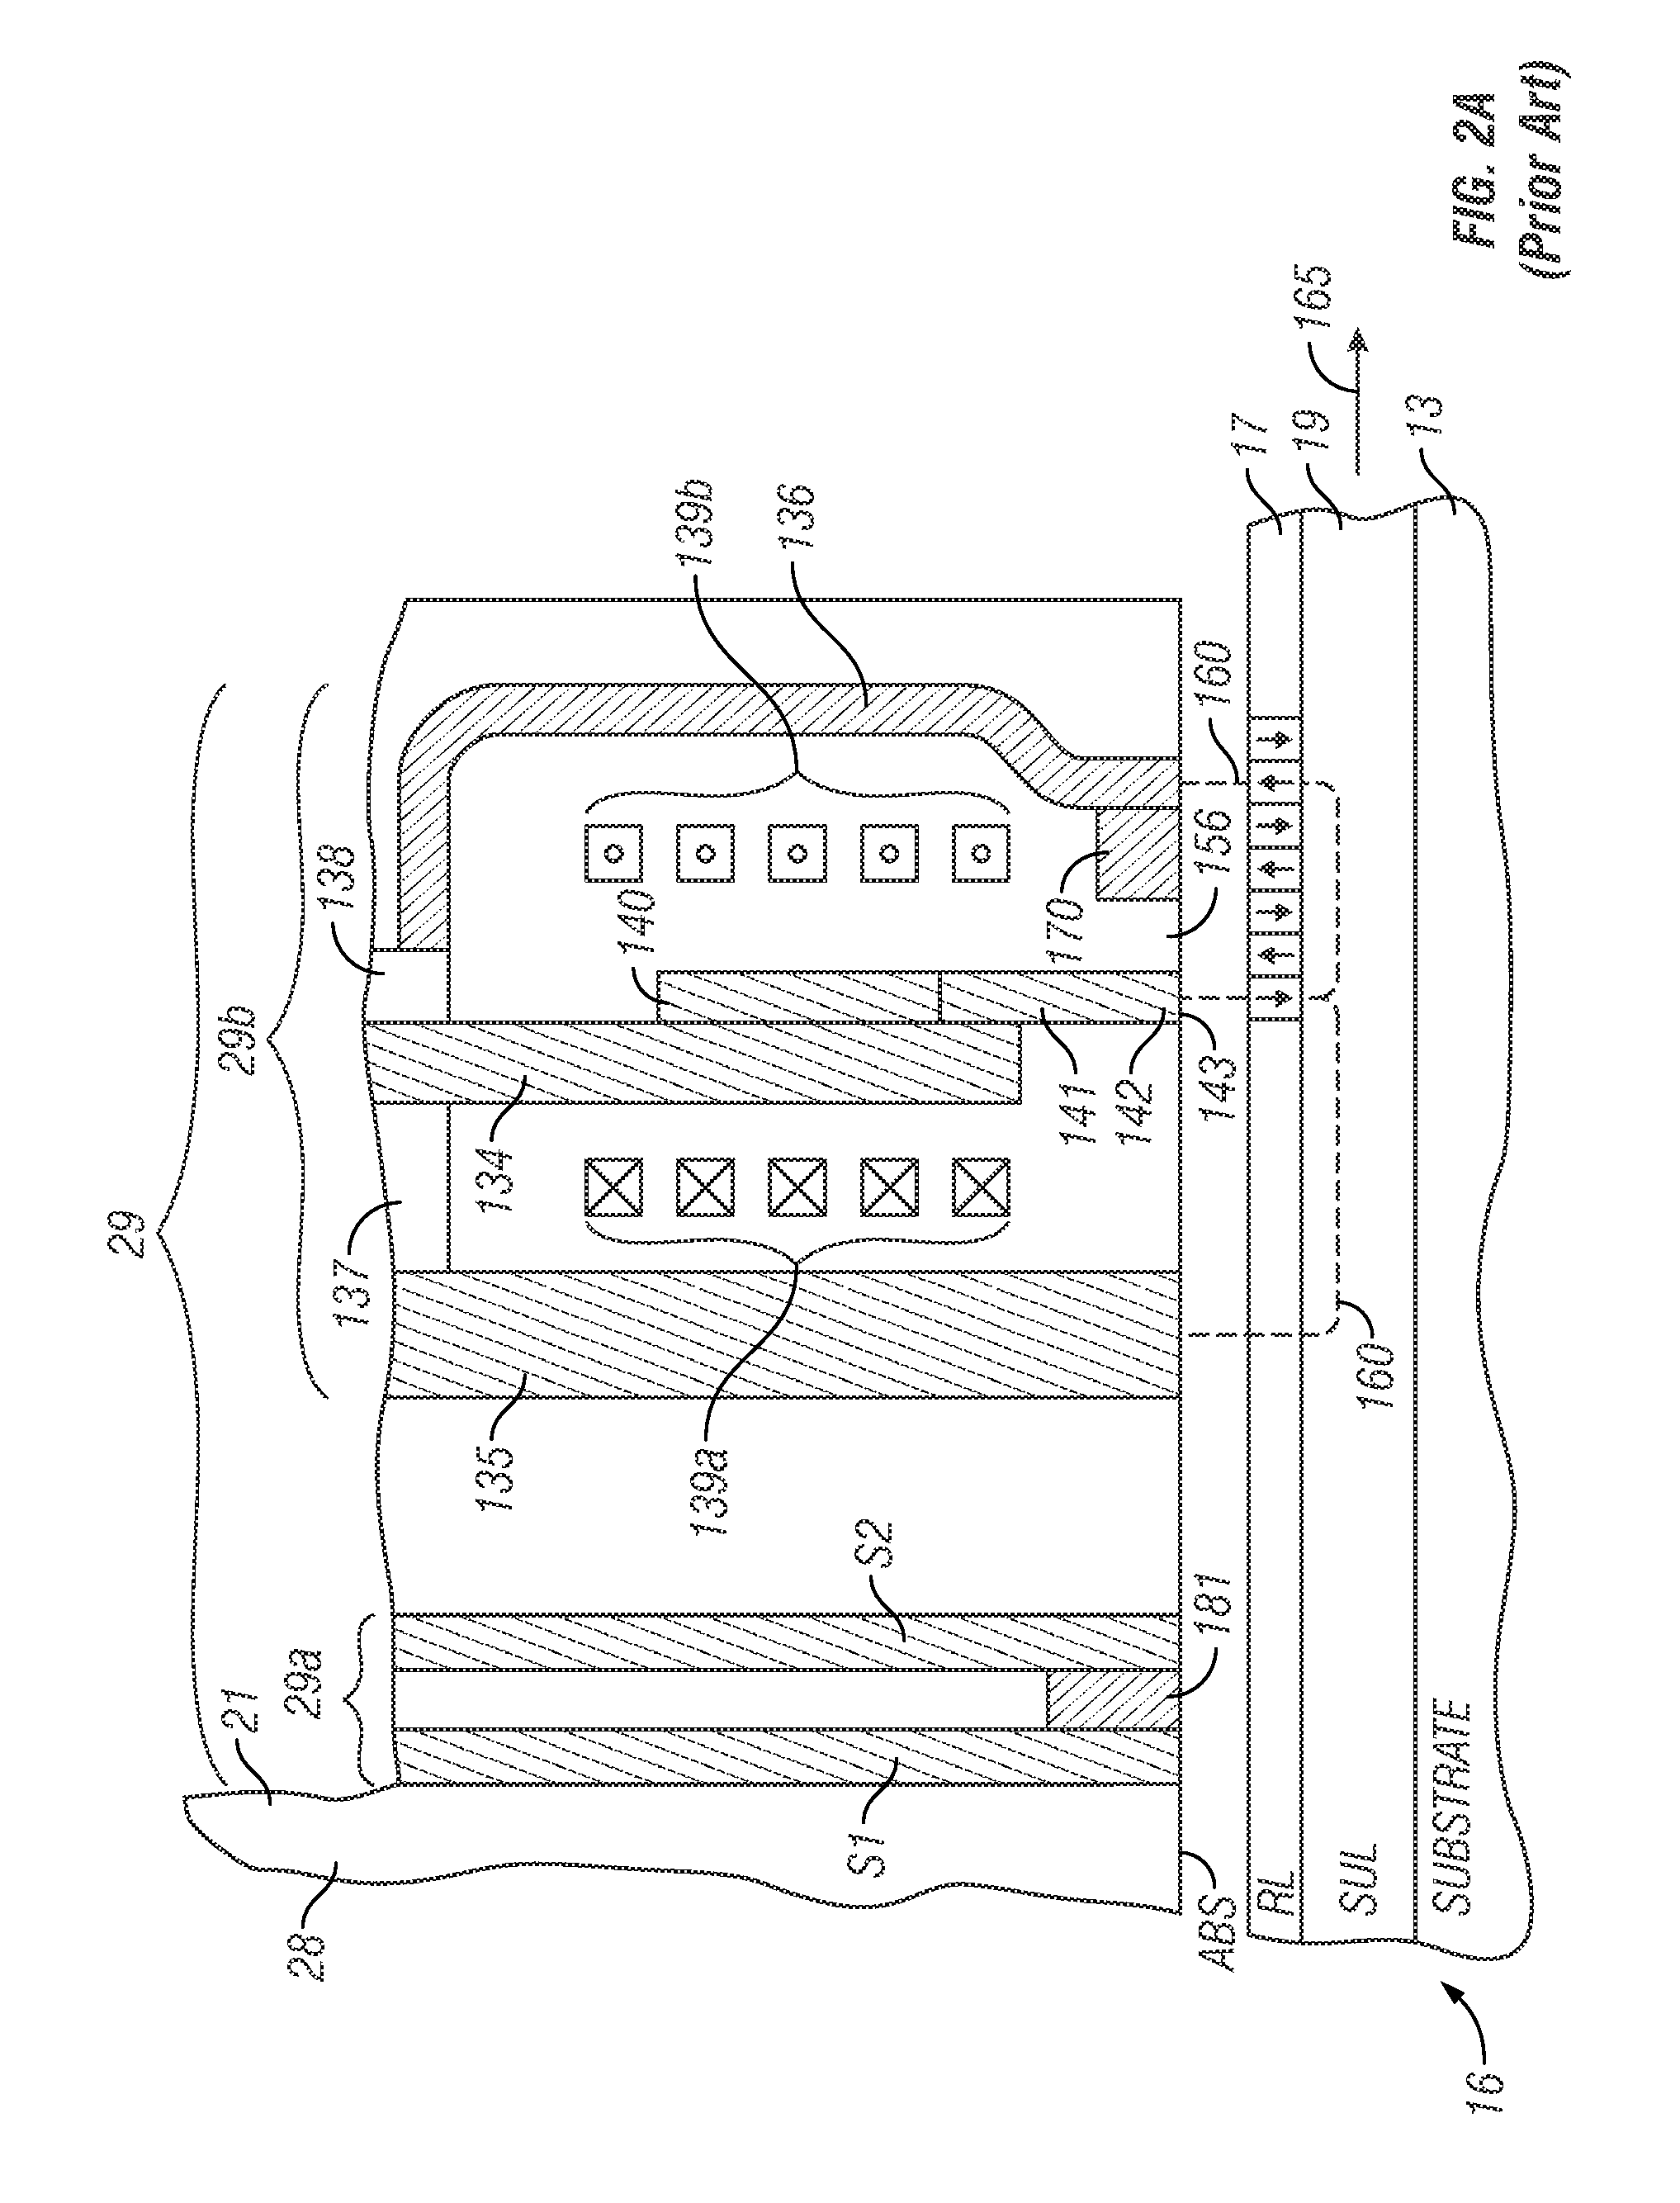 Perpendicular magnetic recording write head and system with improved spin torque oscillator for microwave-assisted magnetic recording